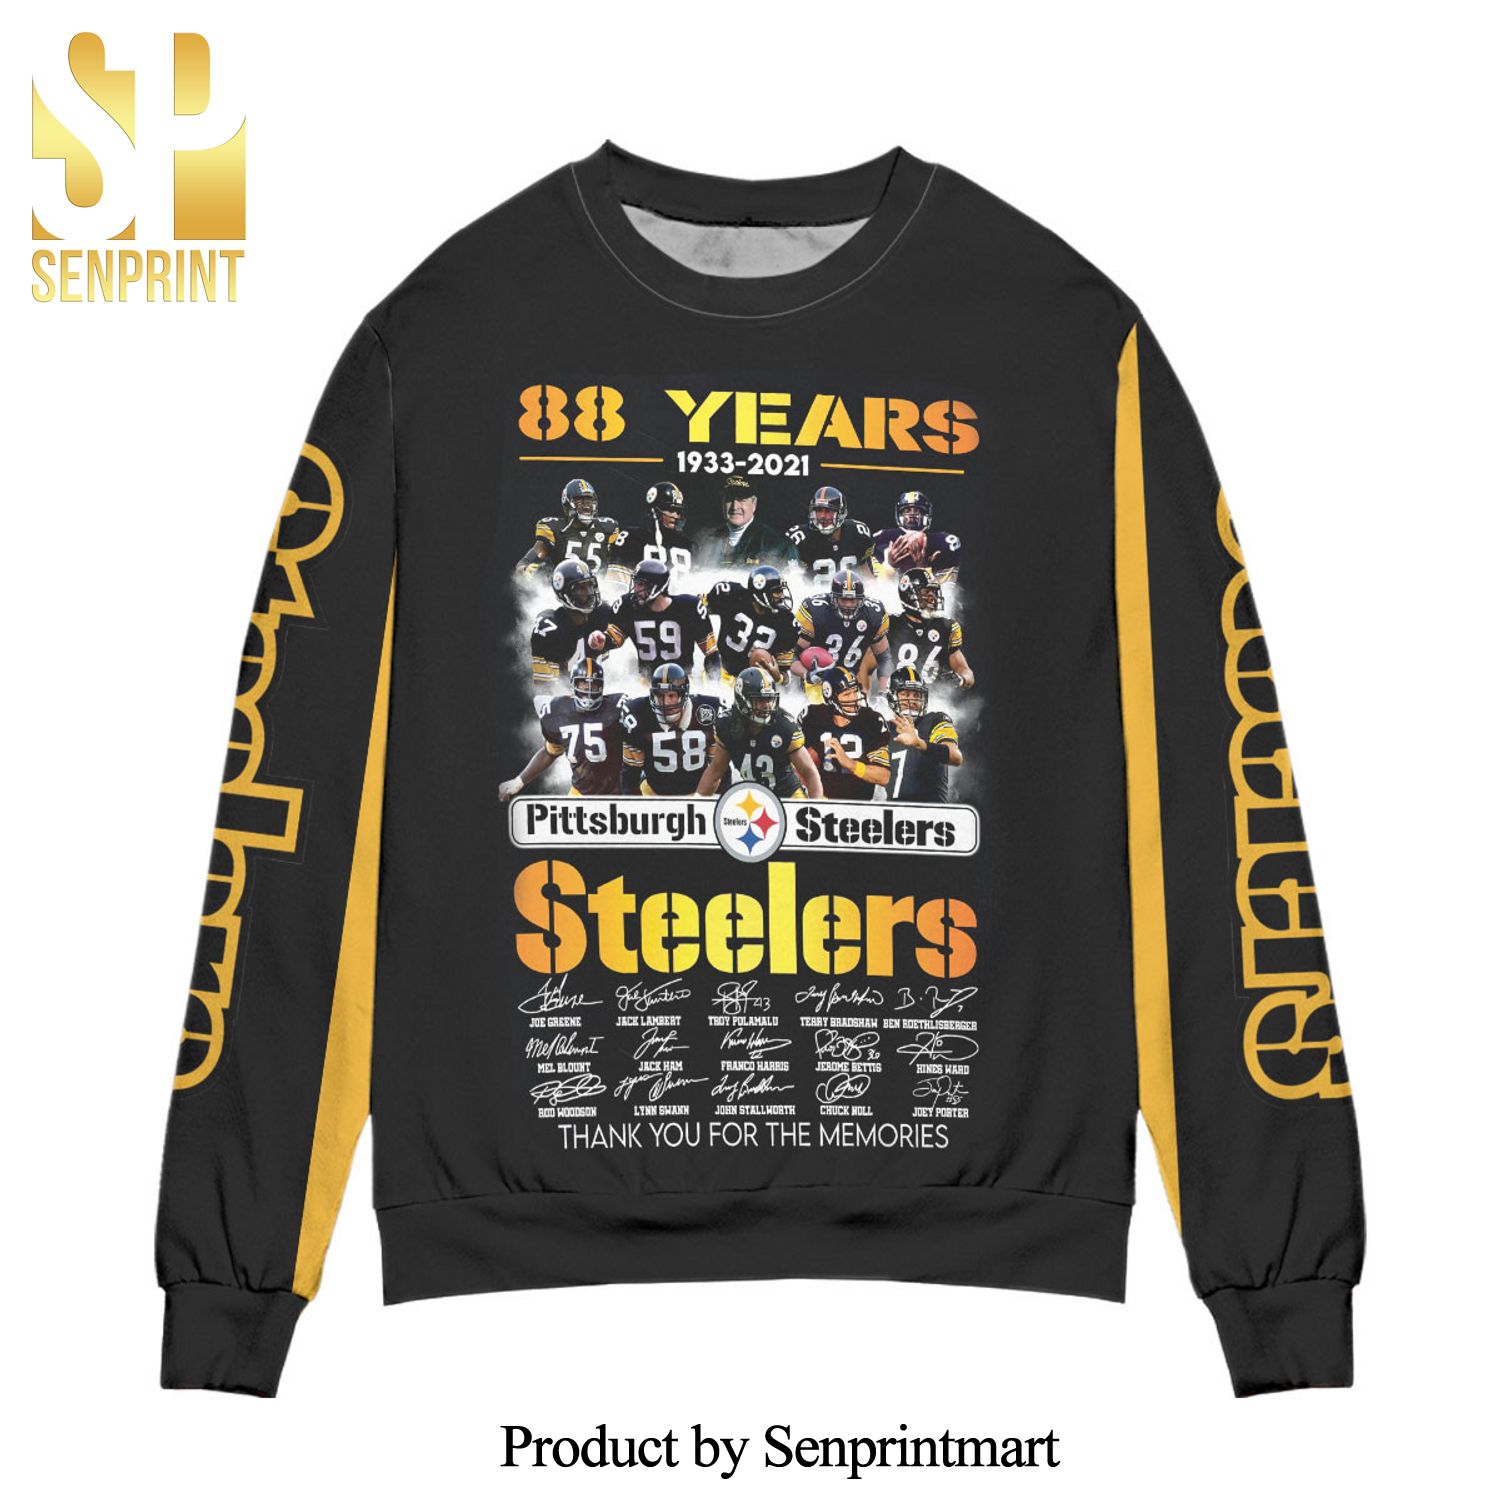 Pittsburgh Steelers Football Team 80 Years Anniversary Knitted Ugly Christmas Sweater – Black